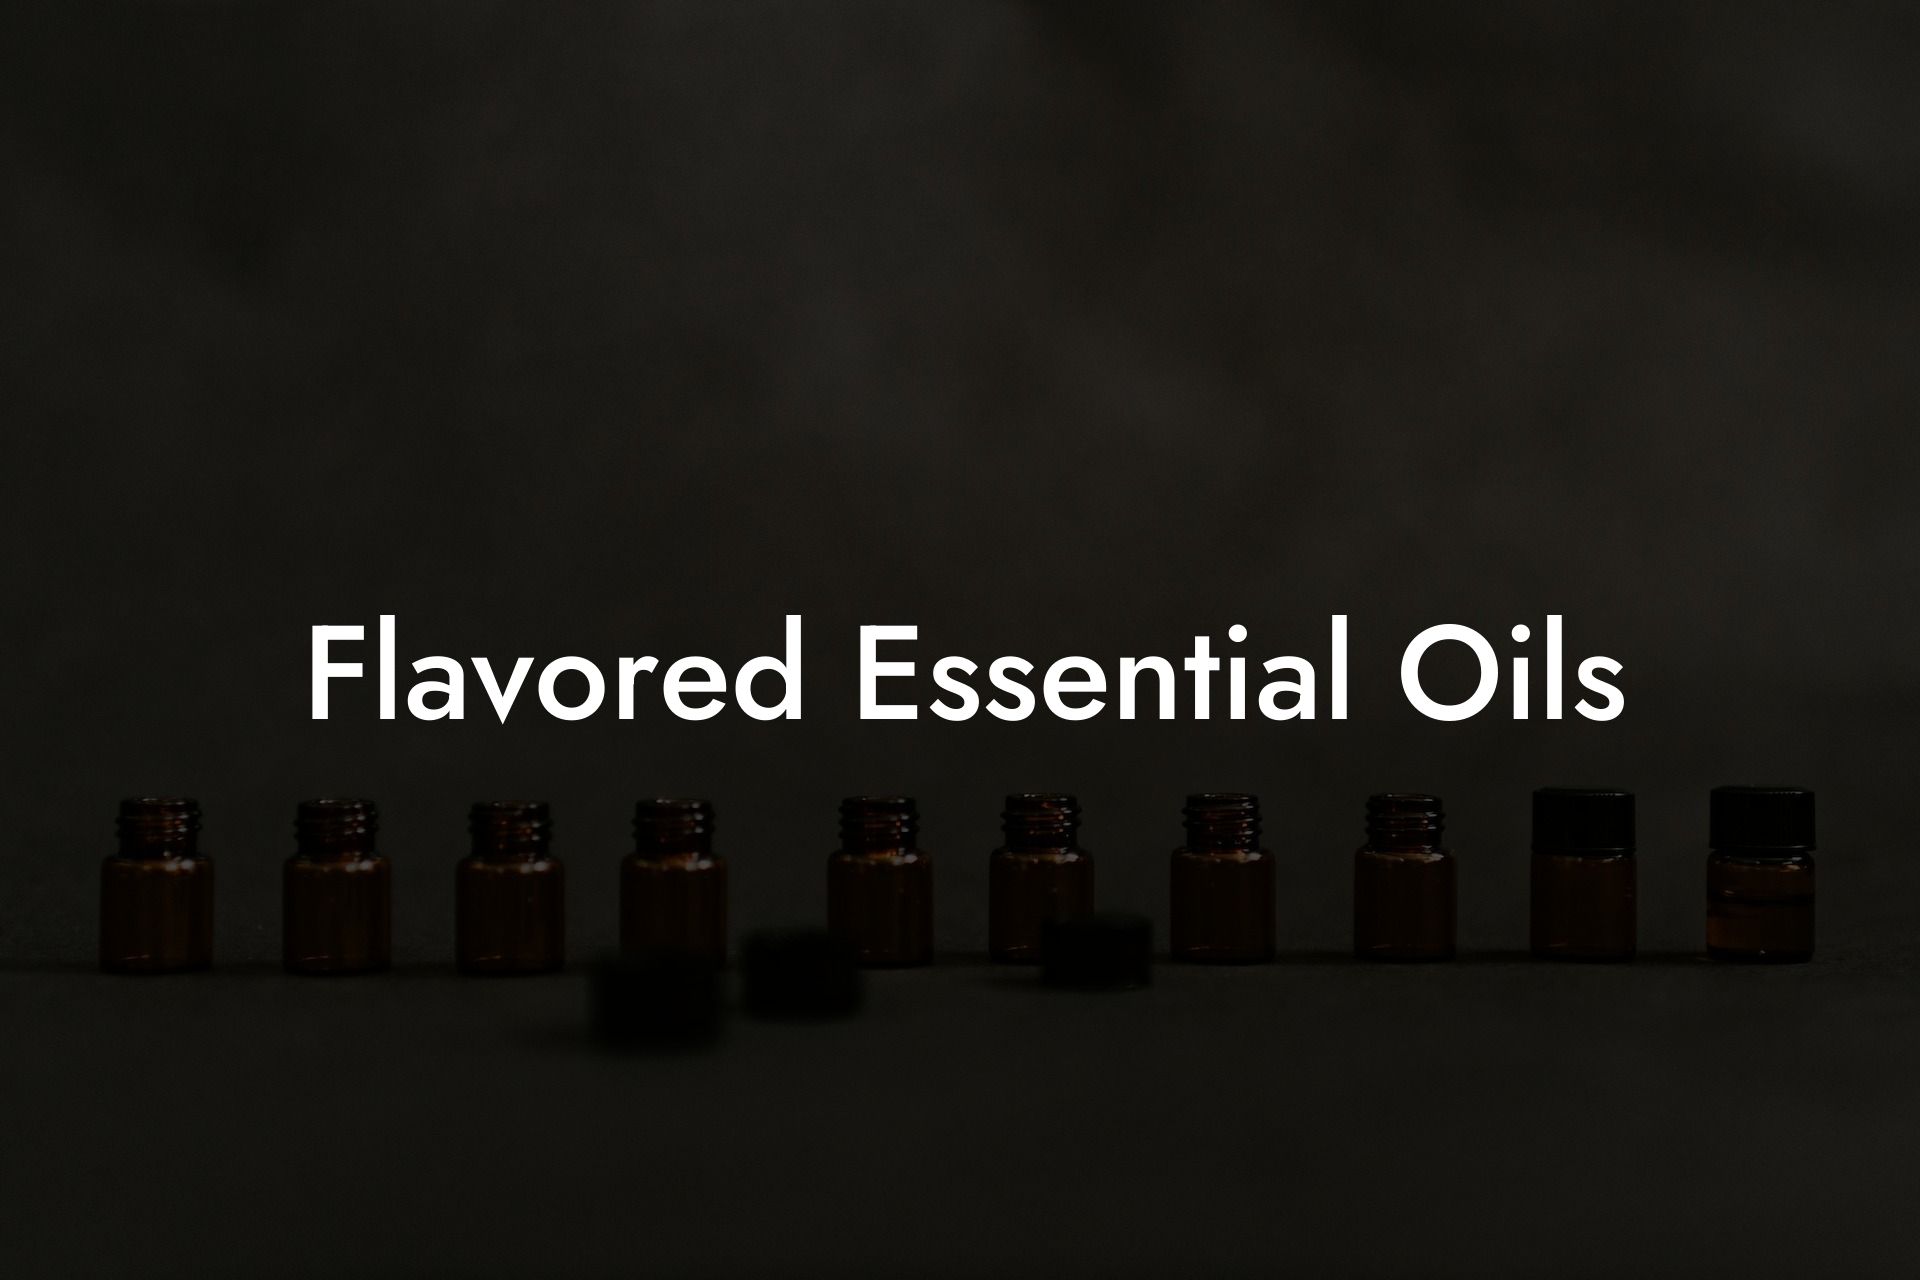 Flavored Essential Oils